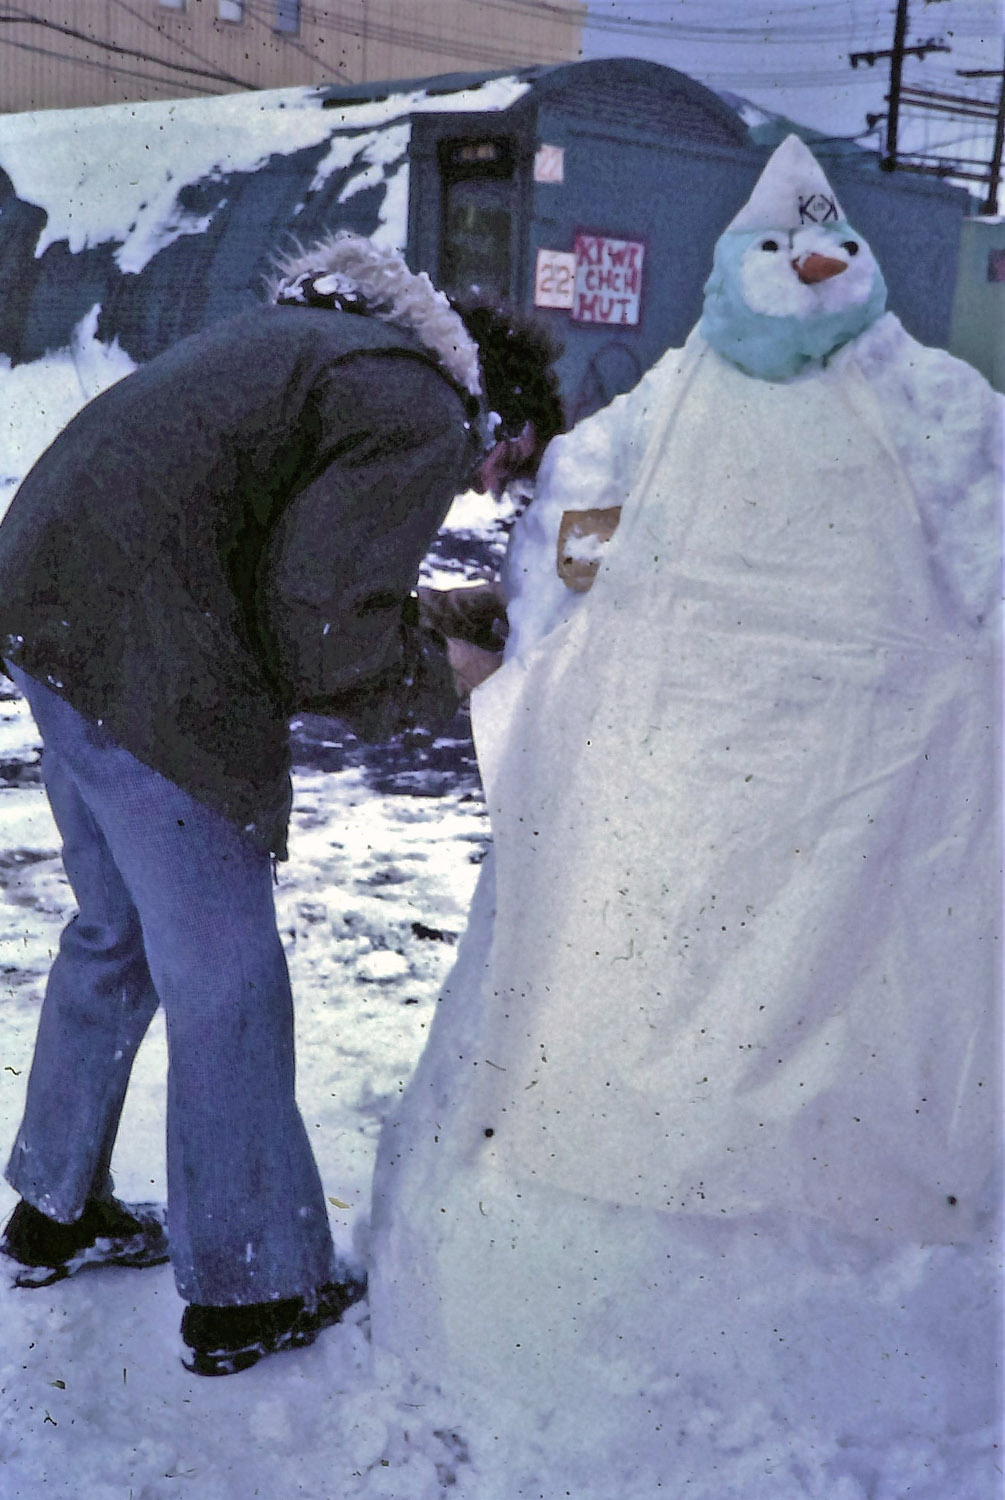 Making a snowman outside the New Zealand accommodation hut at McMurdo